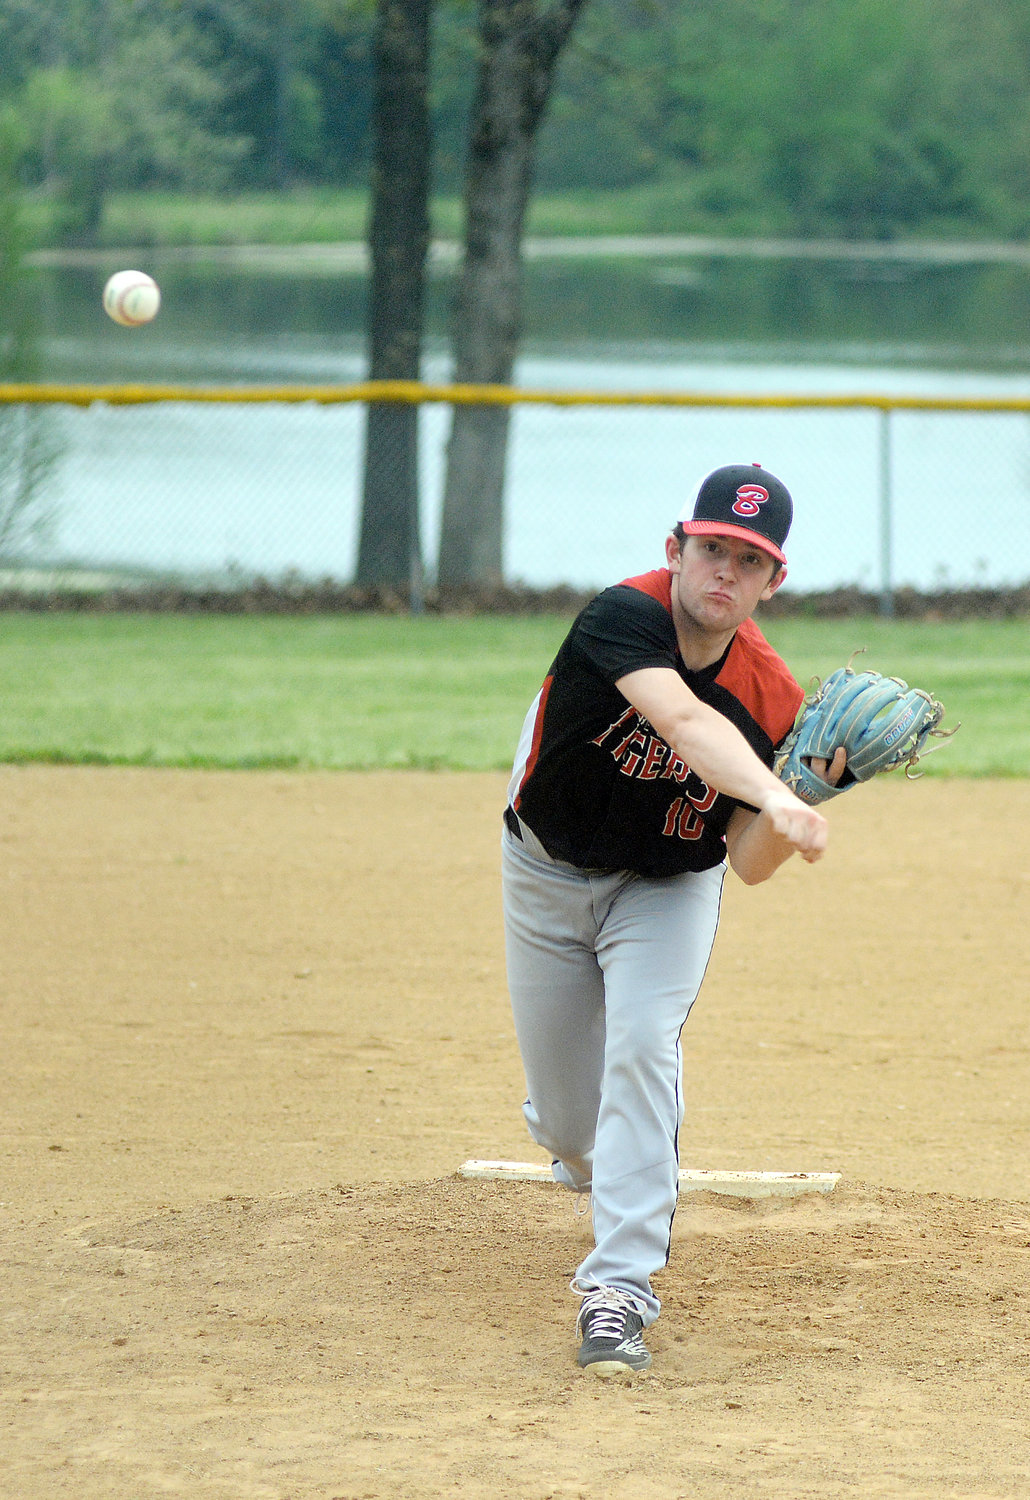 Kameron Newton lets one of his 72 pitches fly for Bryce Gehlert’s Belle Tigers during their 9-6 victory in their regular season finale. Newton picked up the victory while senior Kale Loughridge pitched the seventh inning in relief of Newton.